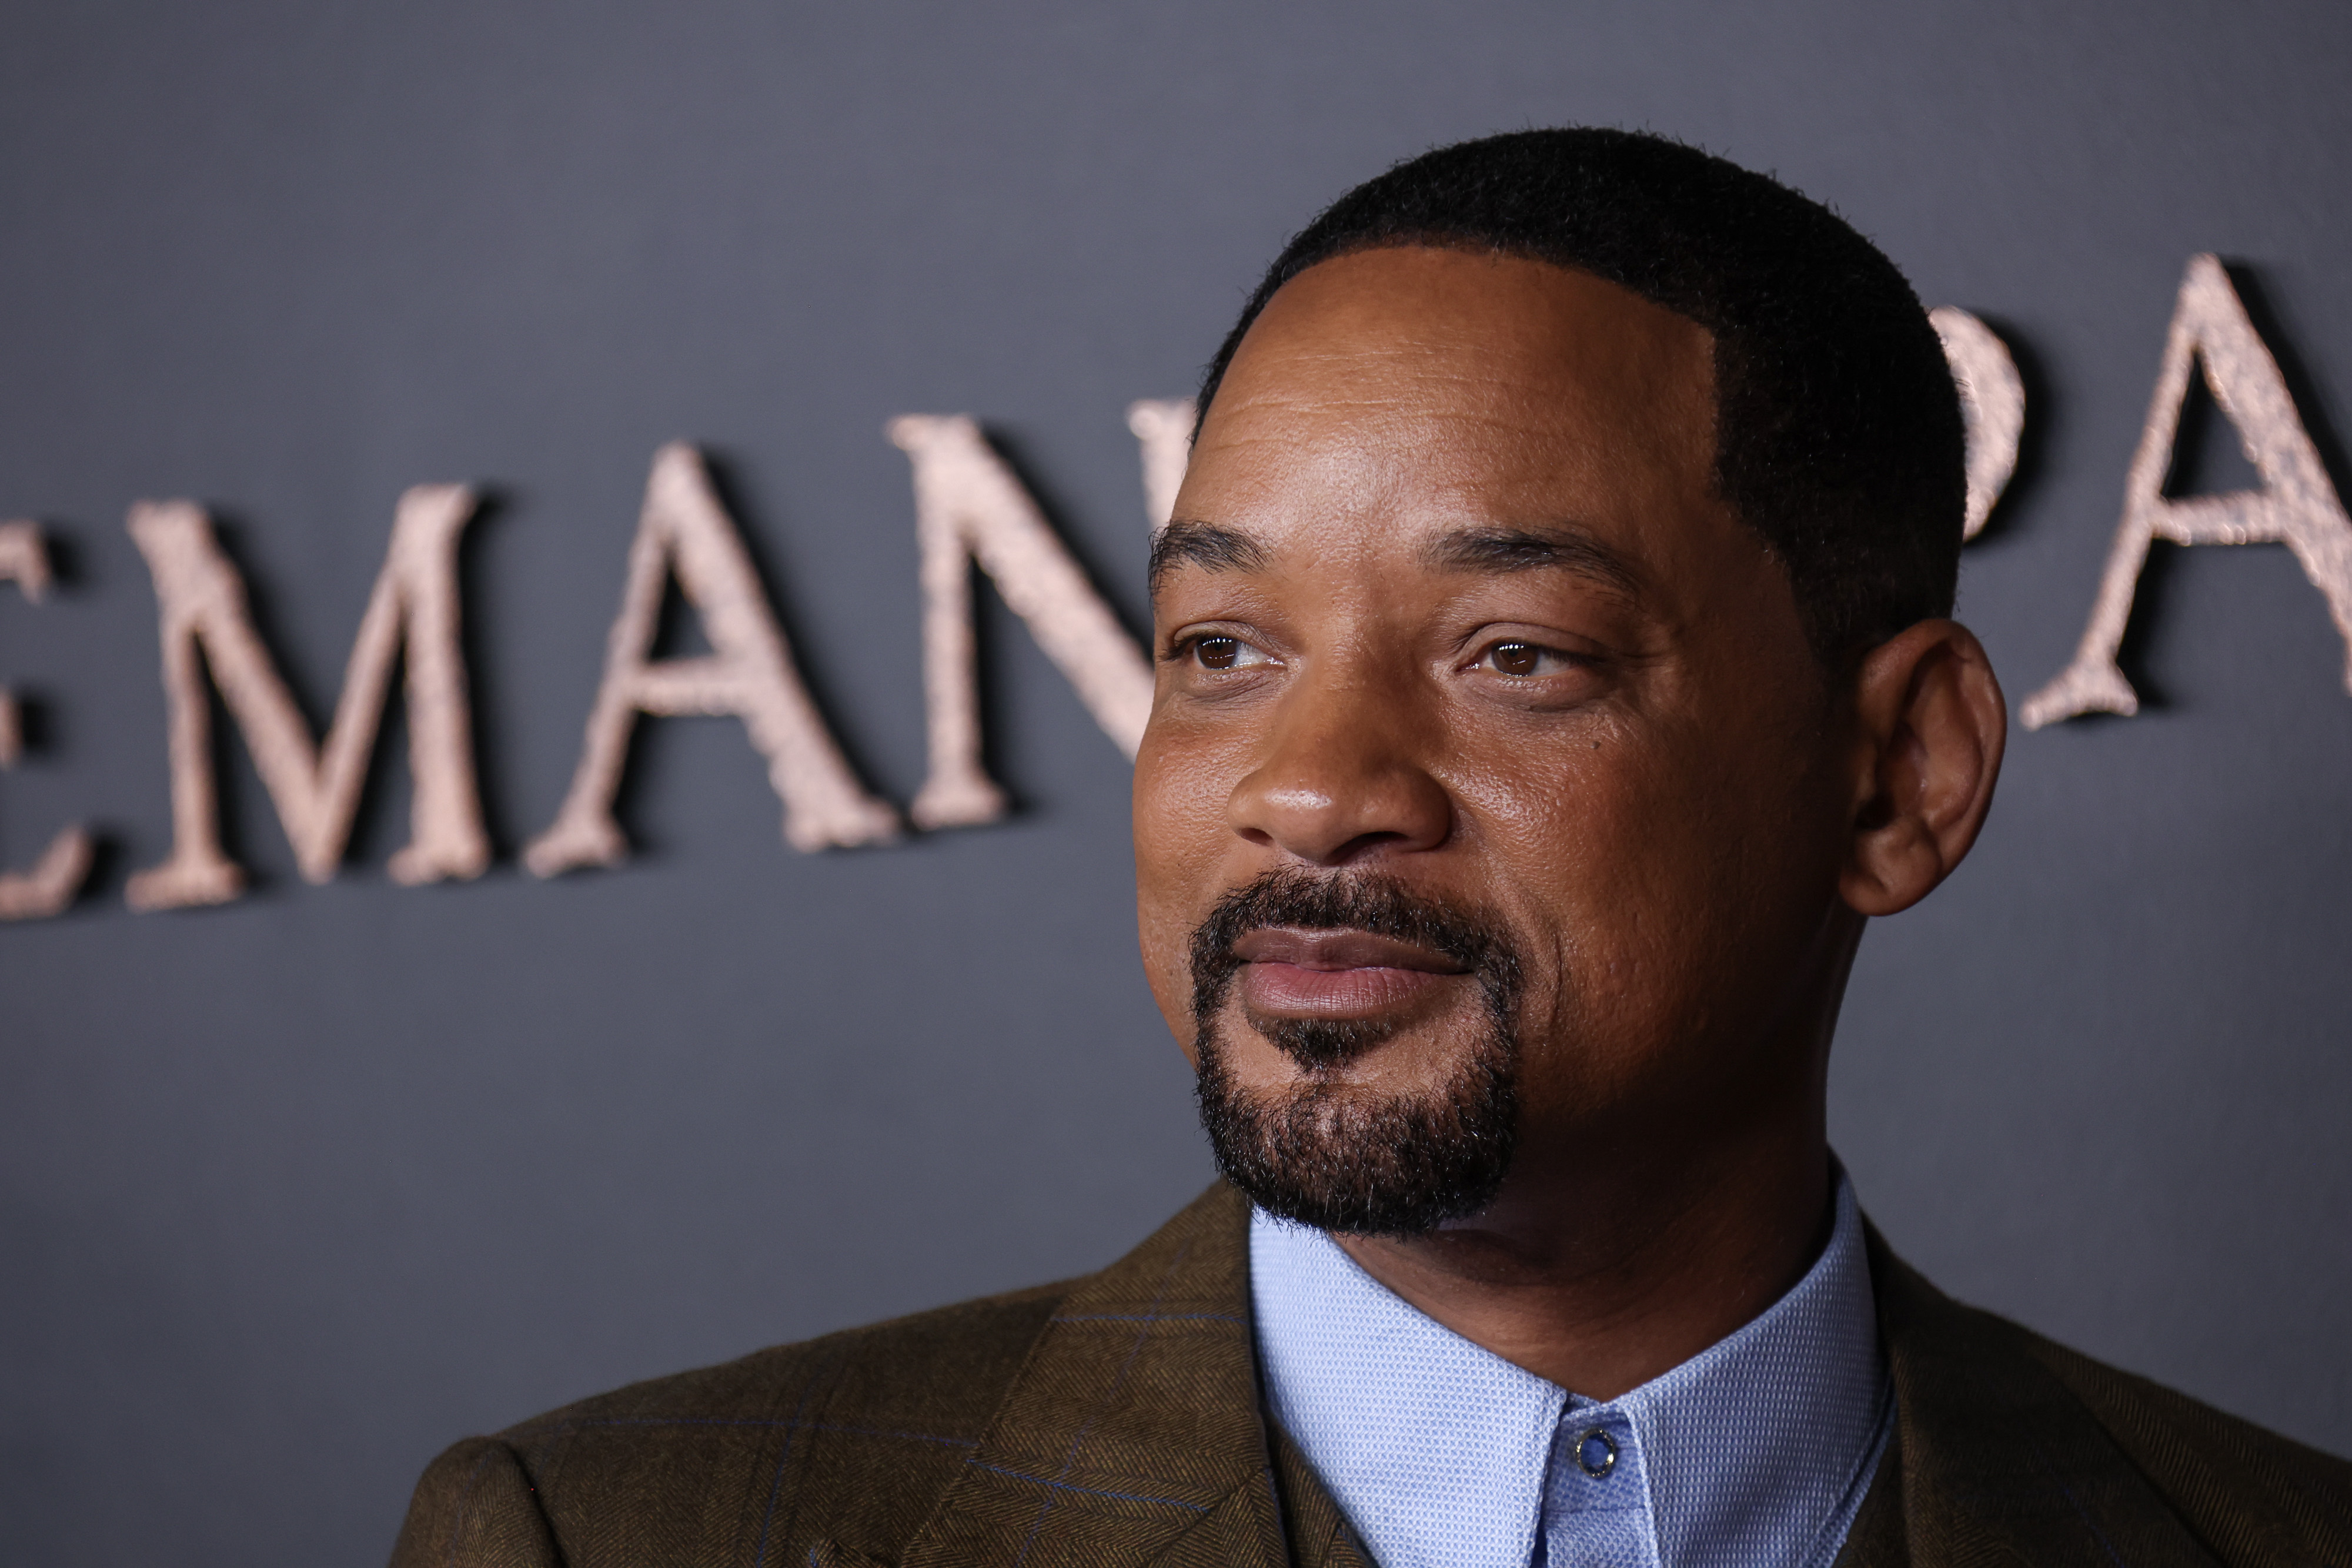 Will Smith To Talk “Emancipation” & Oscars On “Red Table Talk”